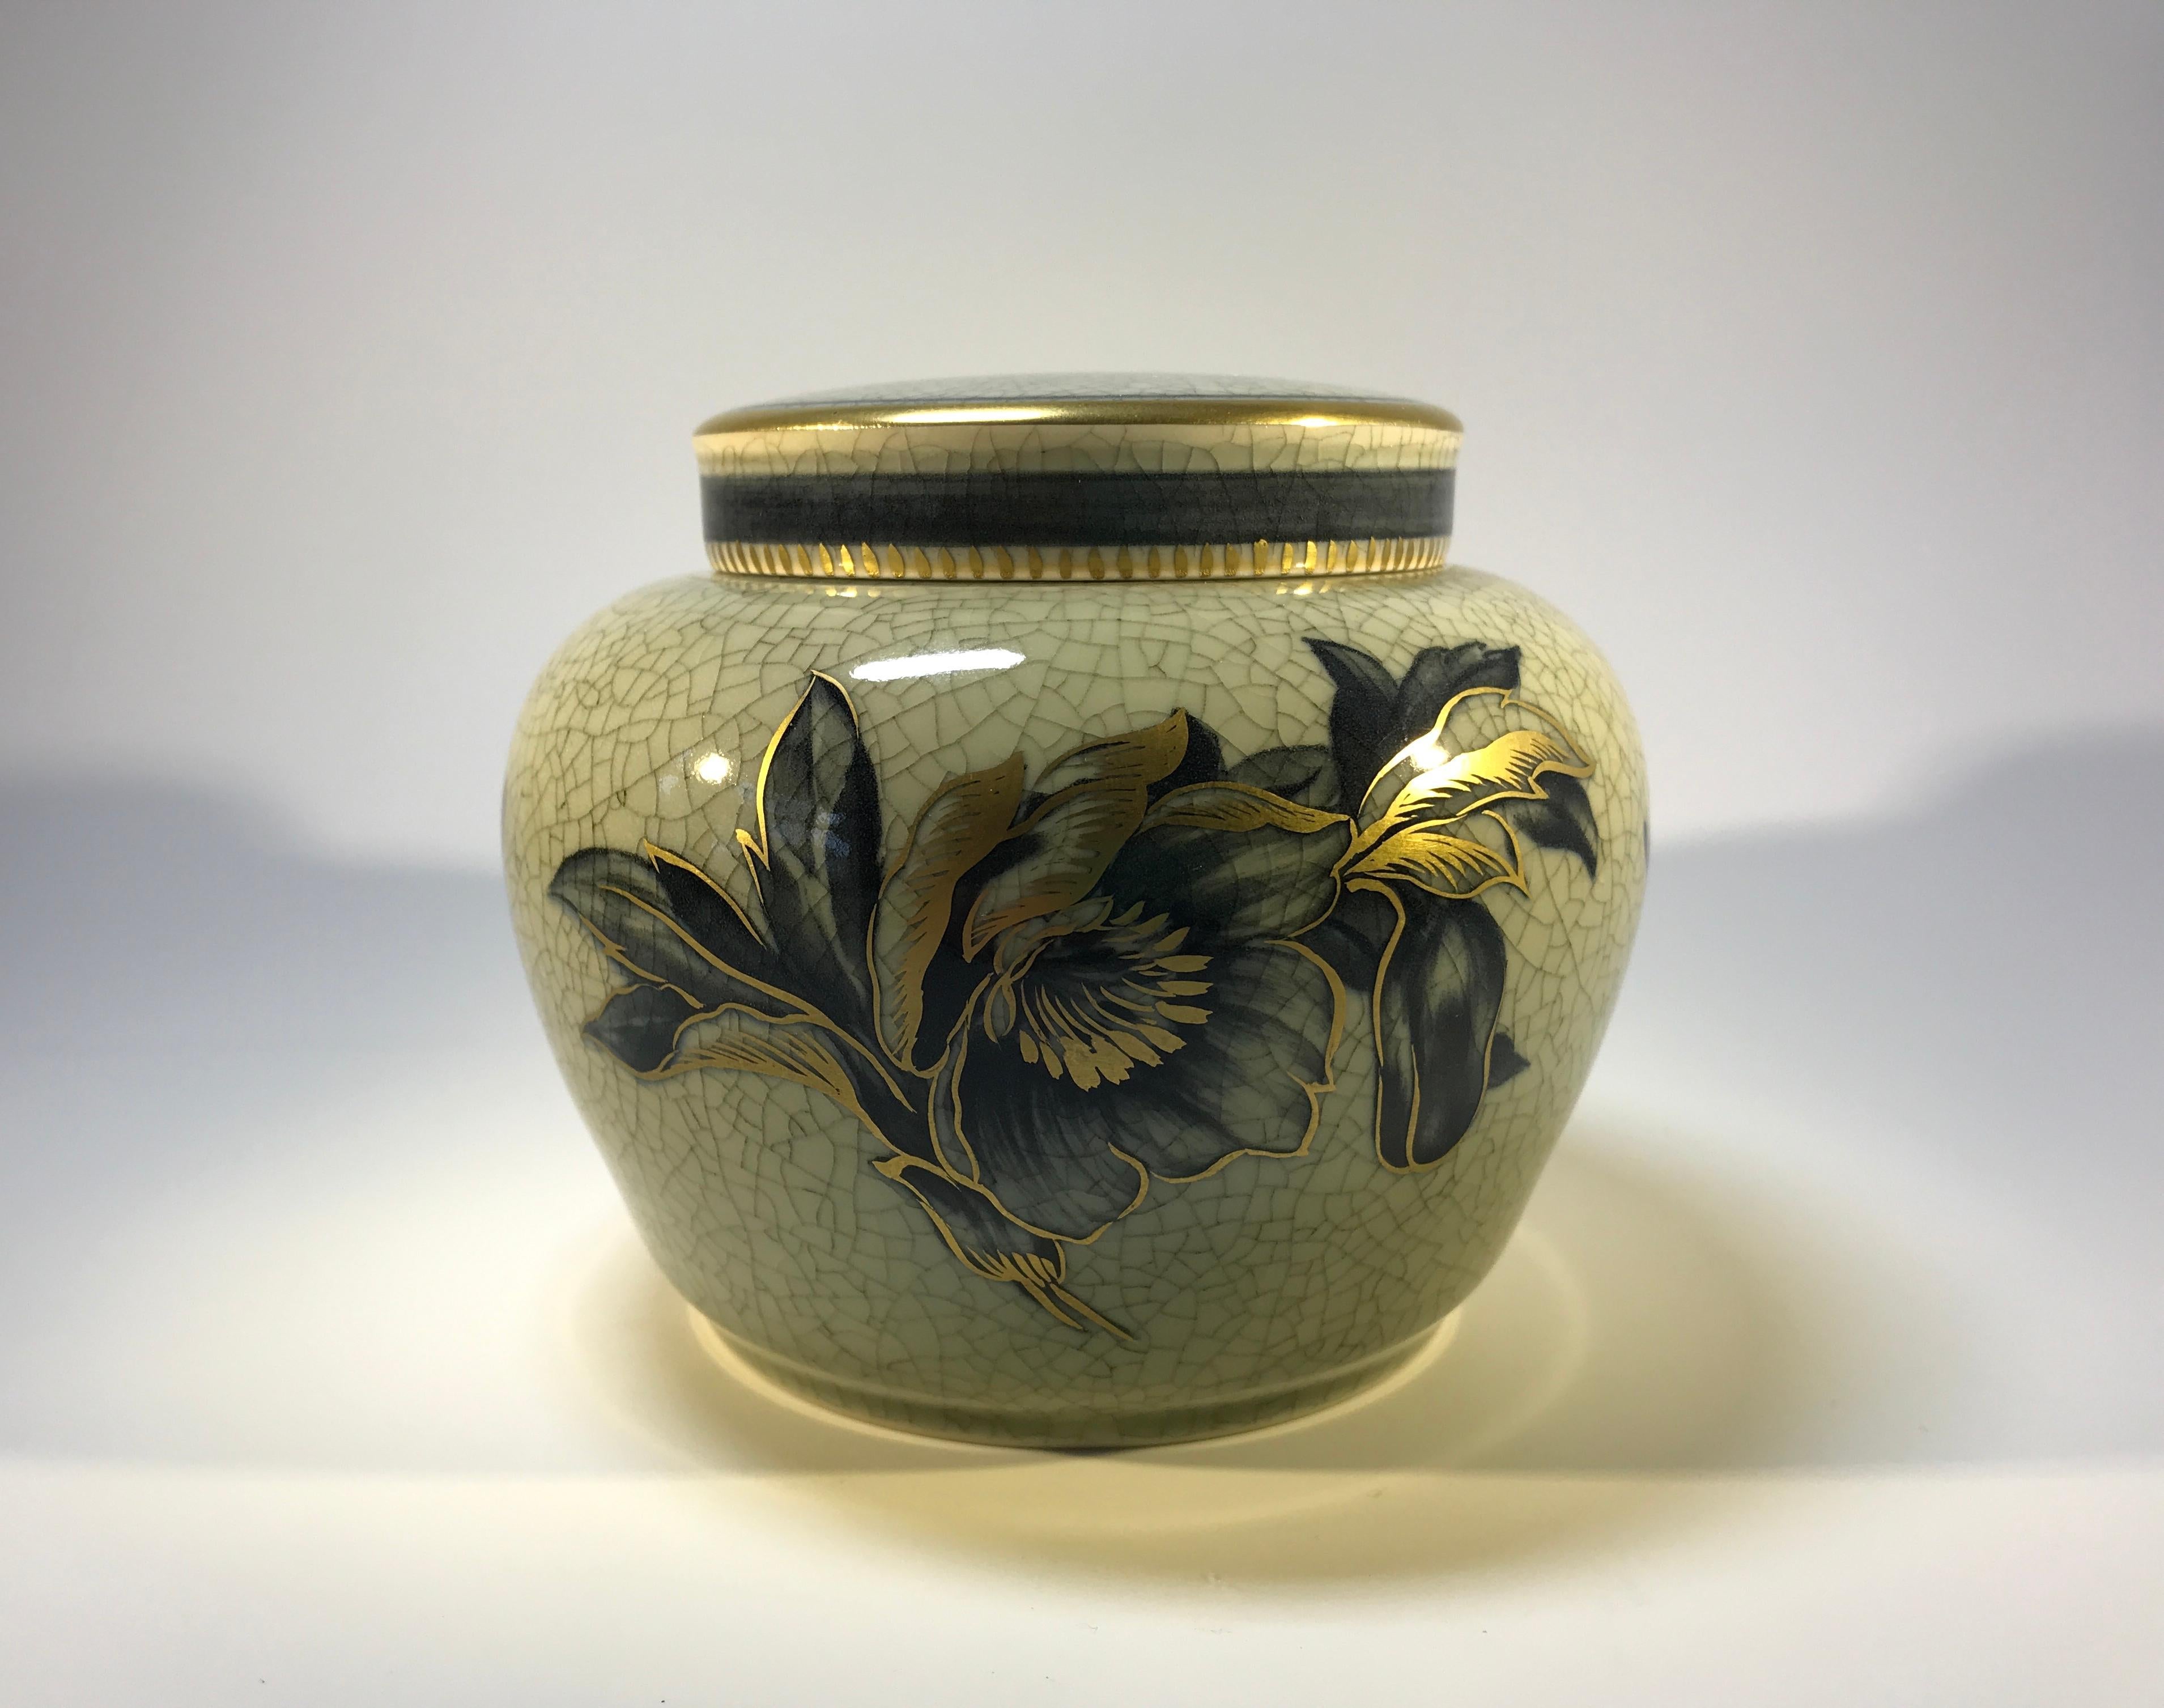 Royal Copenhagen lidded ginger jar with large gilded floral decoration and gilded banding. In Art Deco style this piece has a moss green crackle effect to the glaze.
Signed and numbered 2687 on lid and base
In very good condition.
         